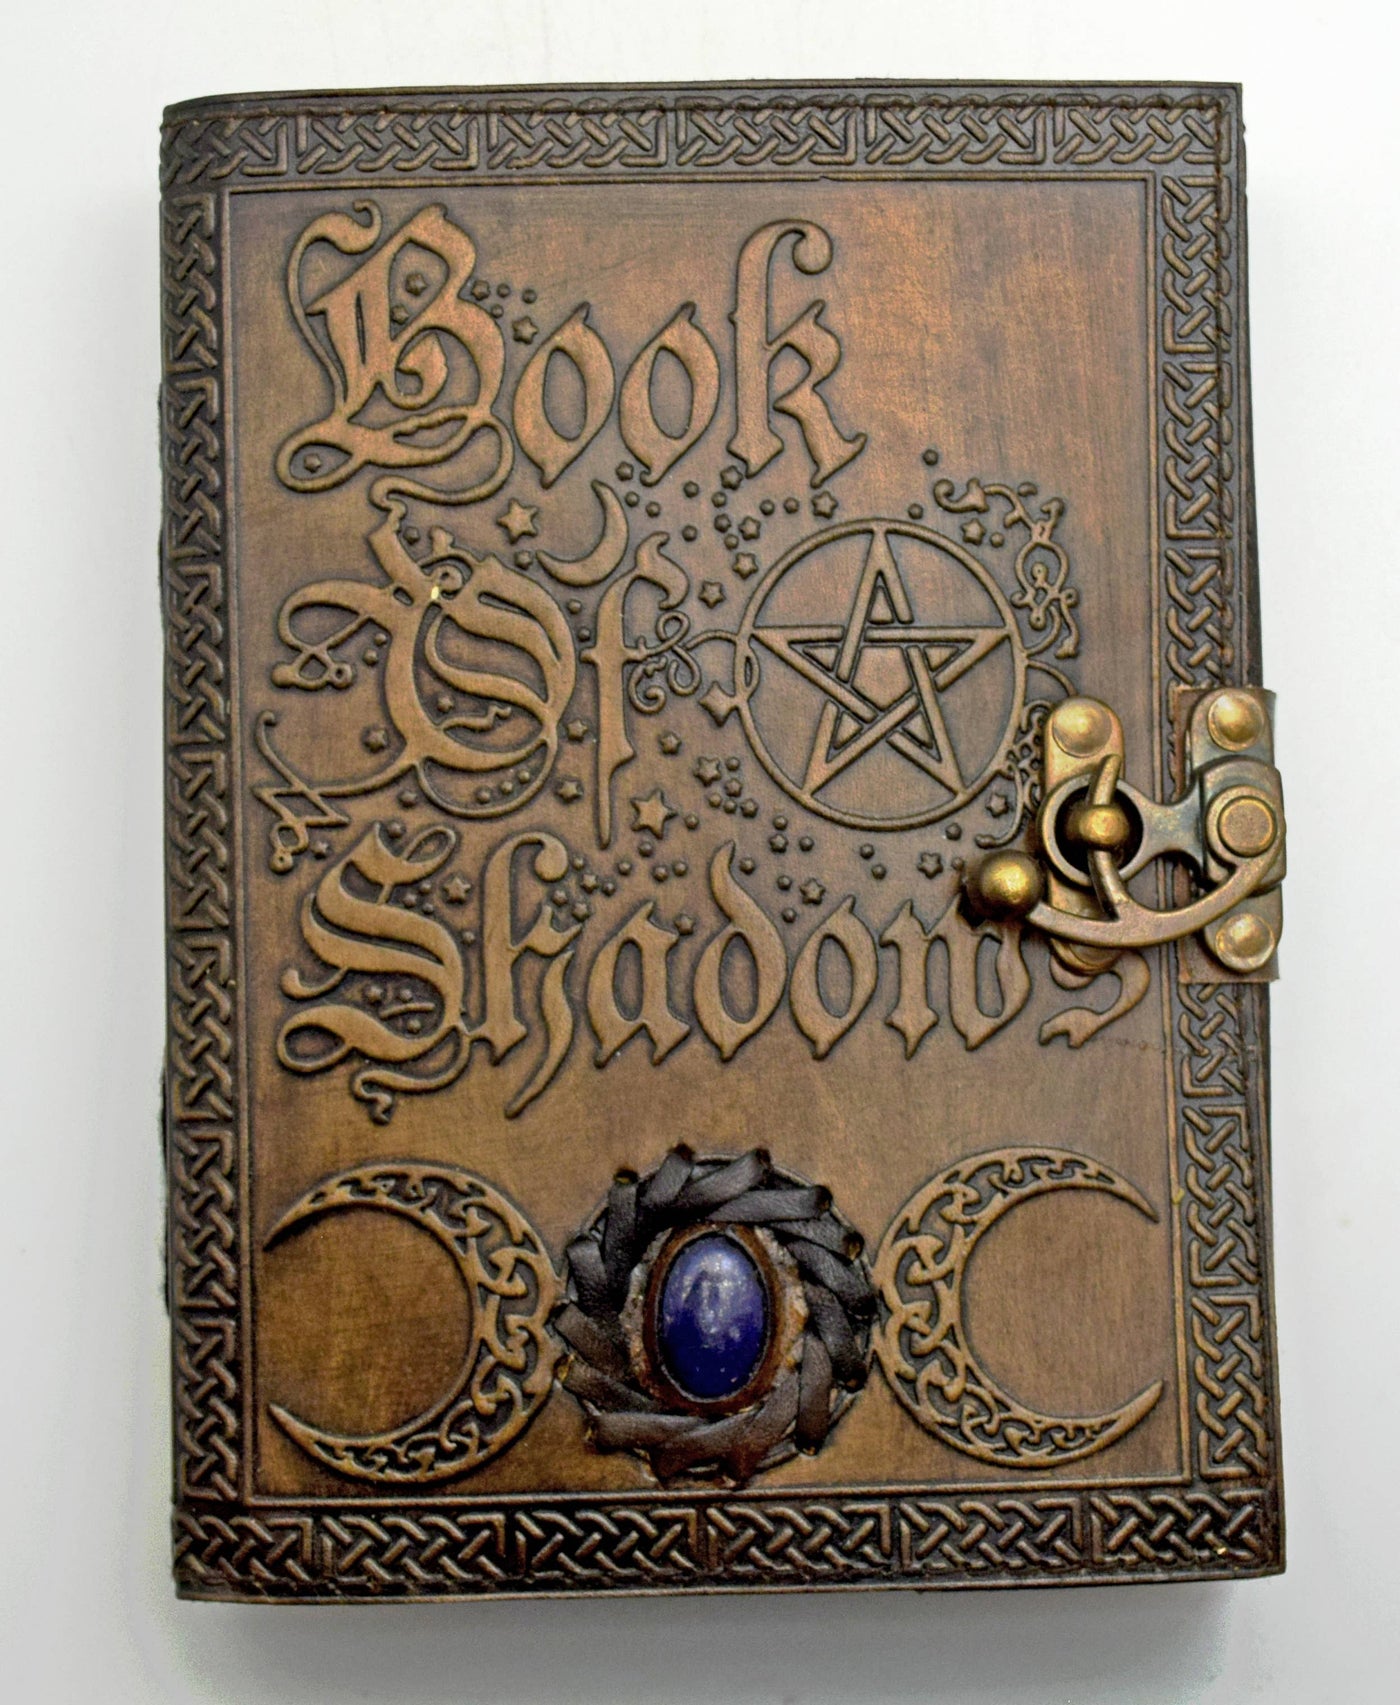 Book of Shaddows Leather Embossed Journal - 5" x 7"